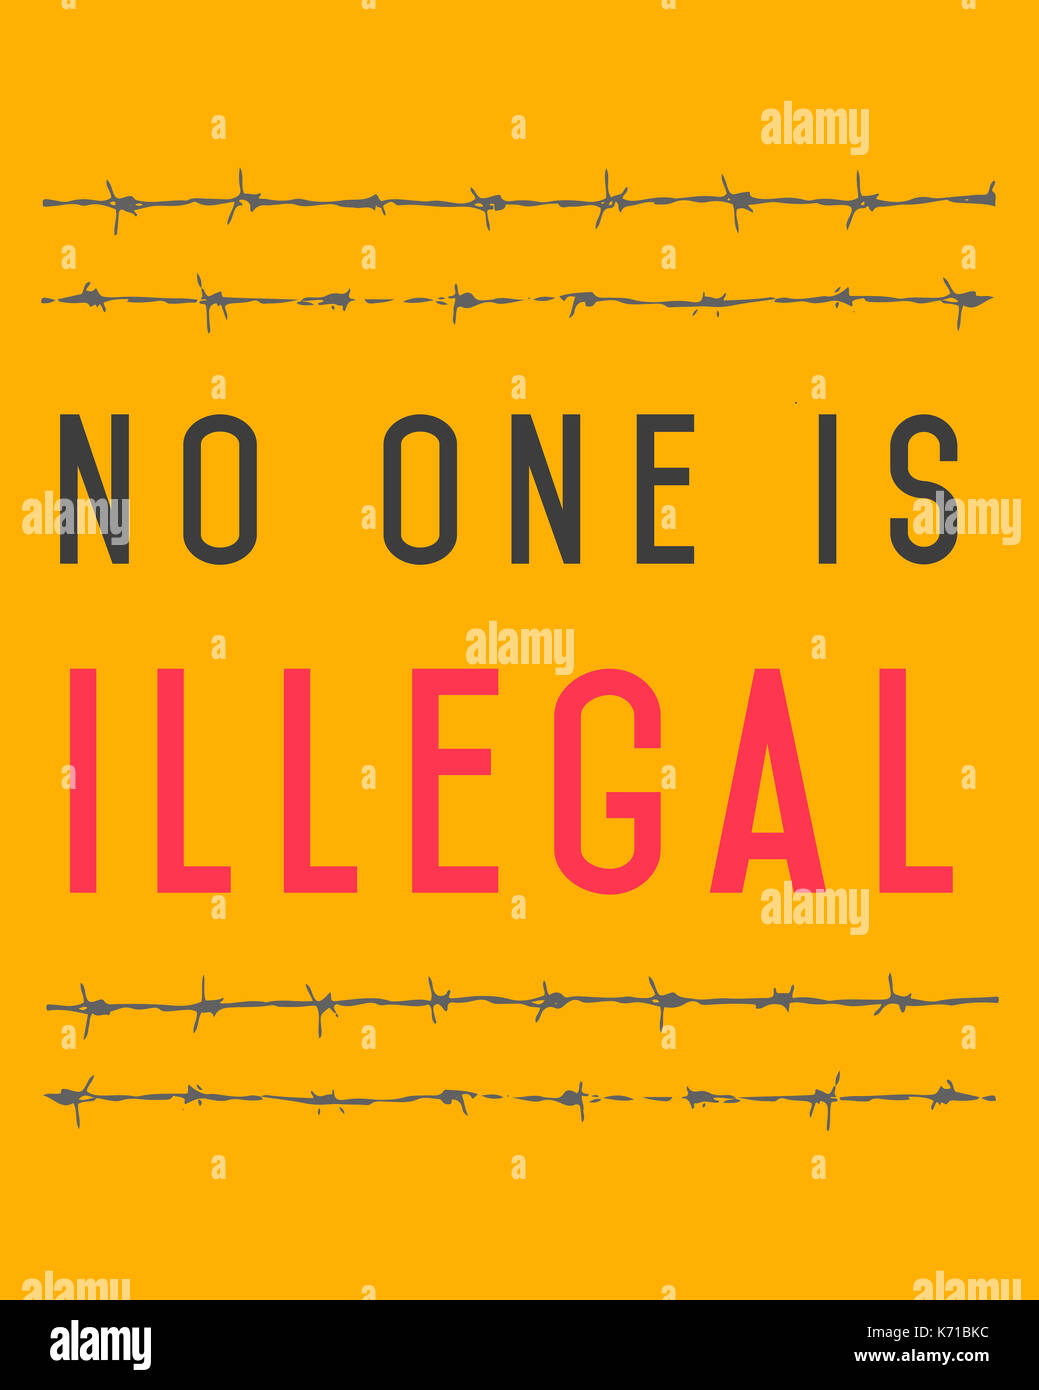 Vector illustration of the phrase: No one is illegal, and a barb wire Stock Photo